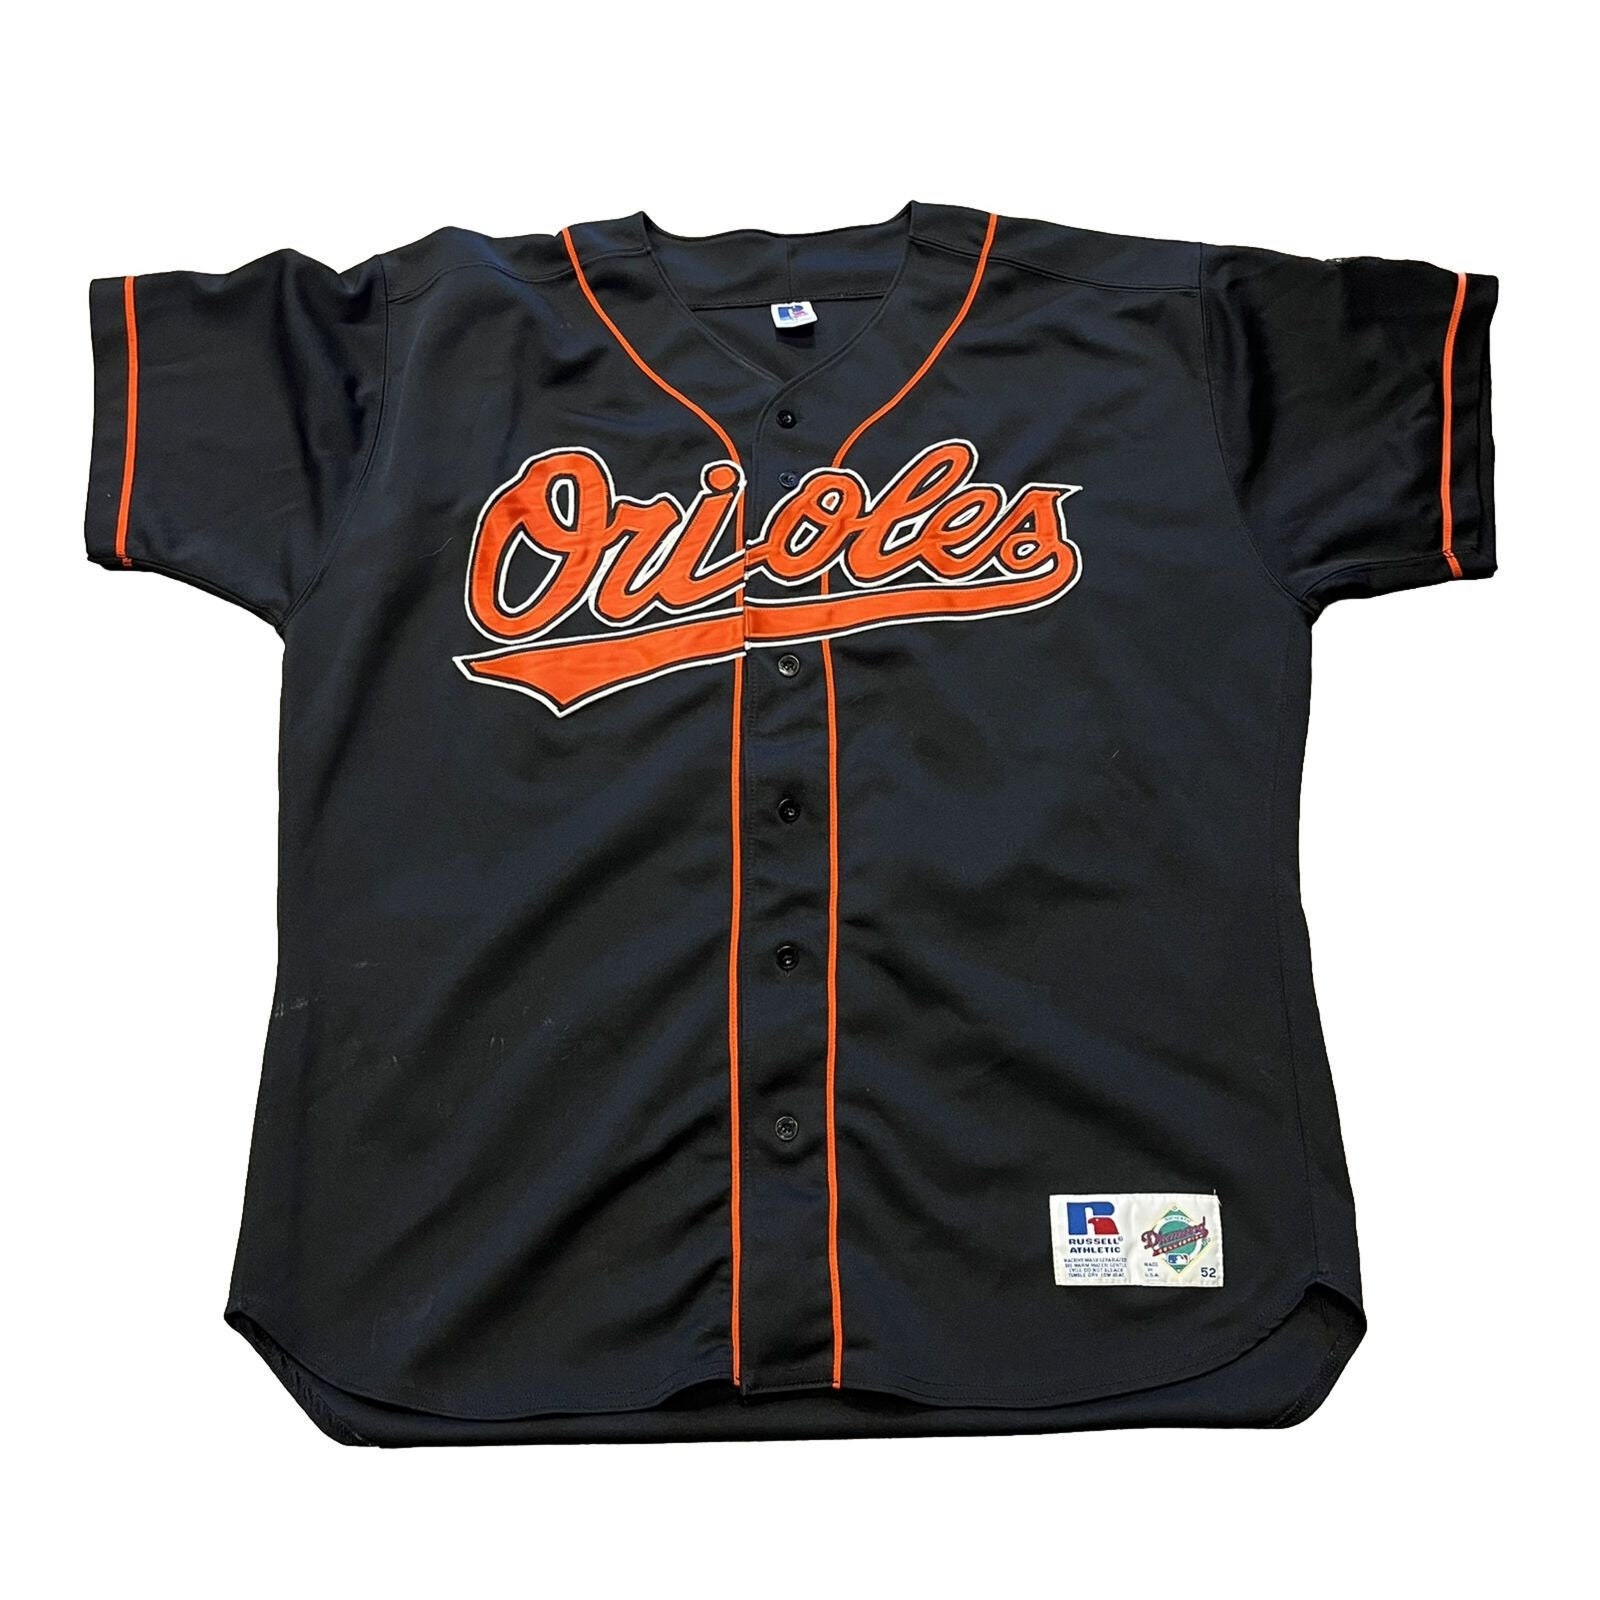 Eddie Murray Baltimore Orioles 1979 Cooperstown Baseball Throwback Jersey,  Baseball Stitched Jersey, Vintage Unifrom Jersey 